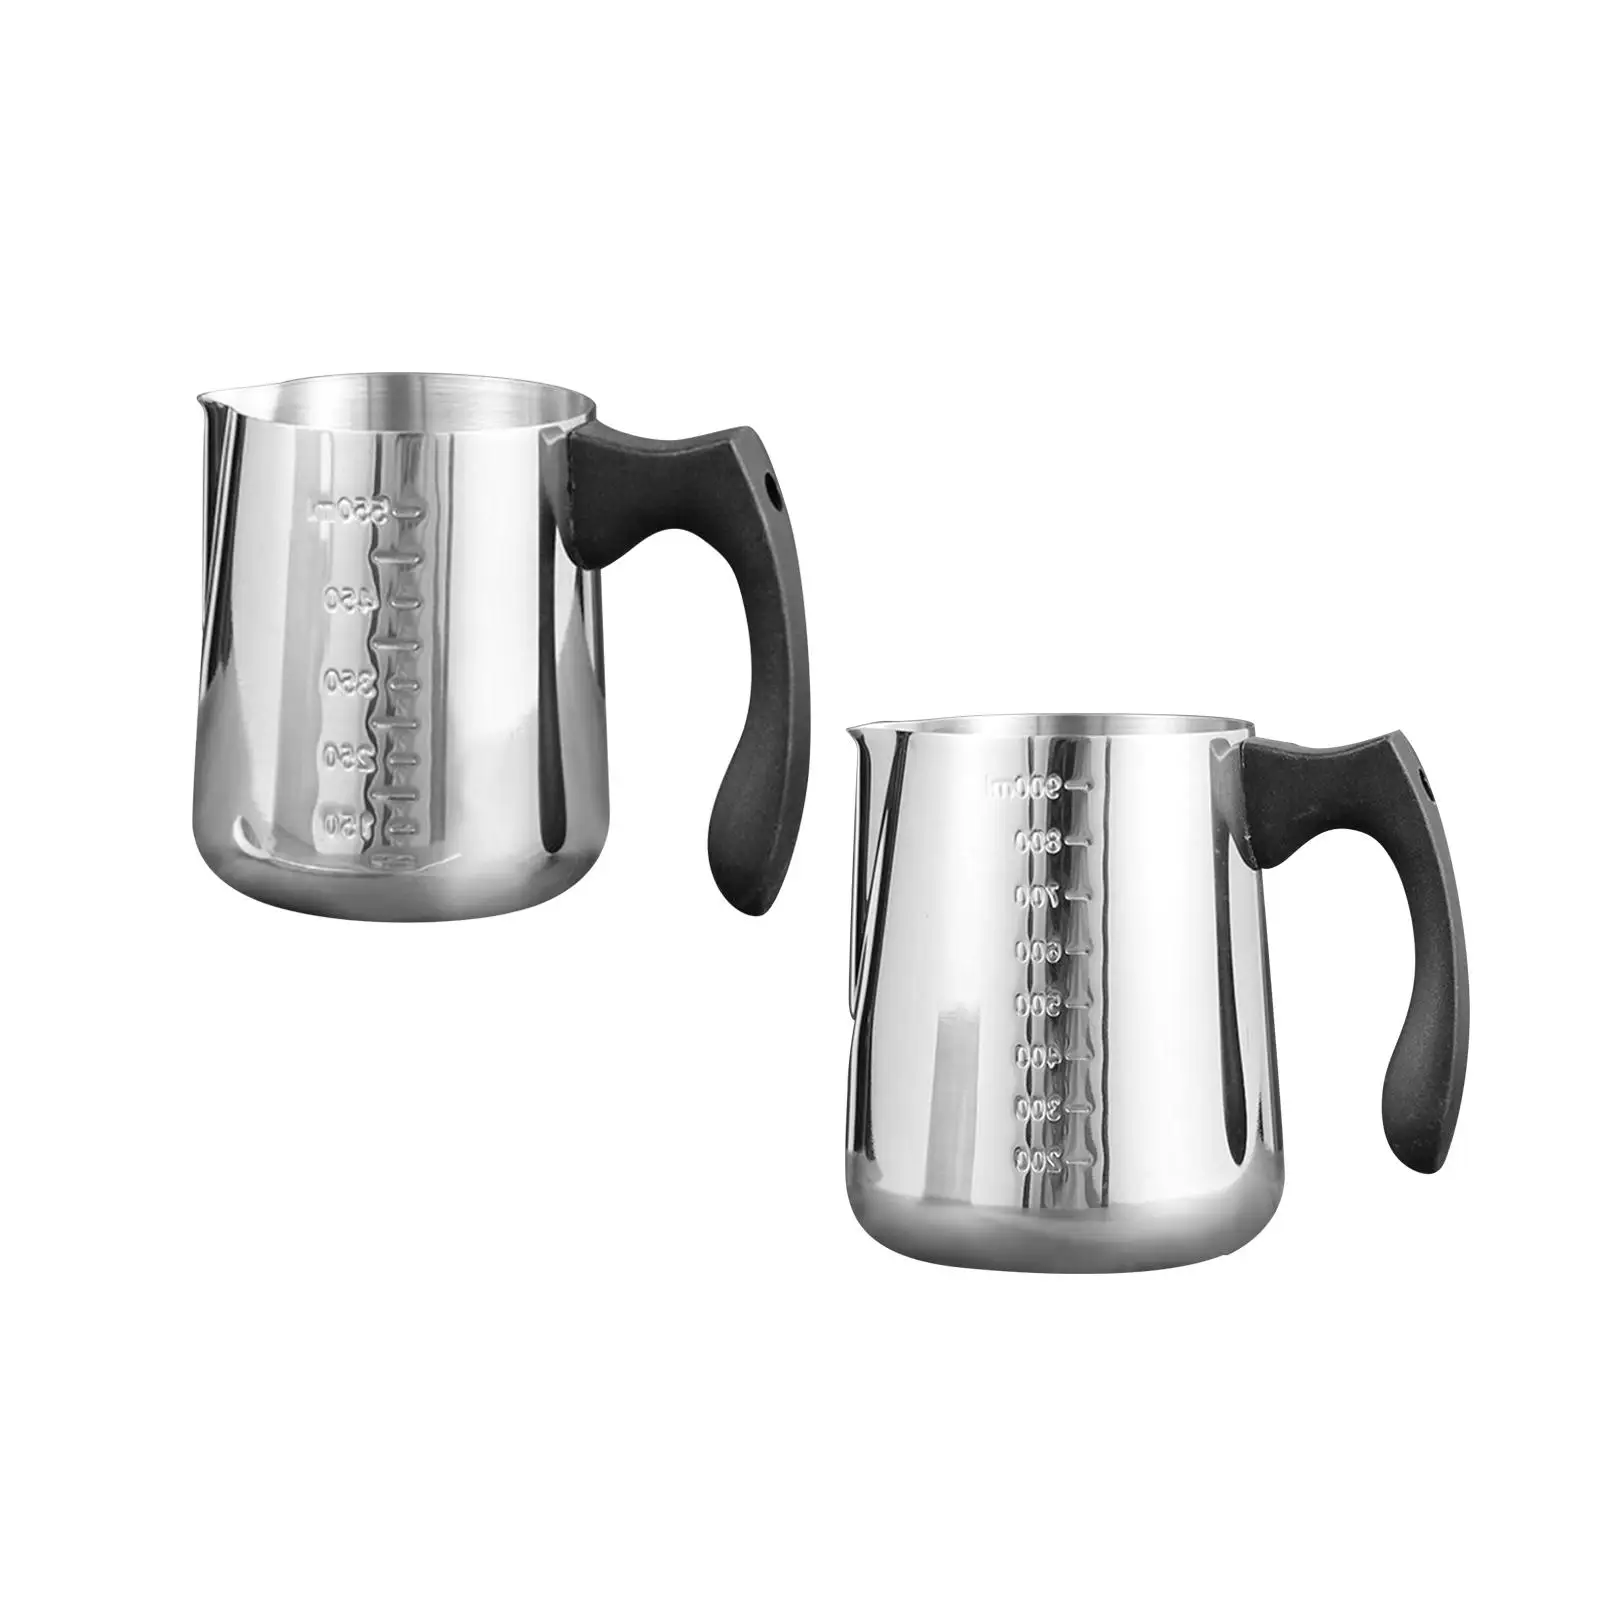 Multifunctional Milk Frothing Mug Barista Steam Mugs Espresso Steaming Cups Milk Jug Cup Coffeware for Holiday Party Kitchen